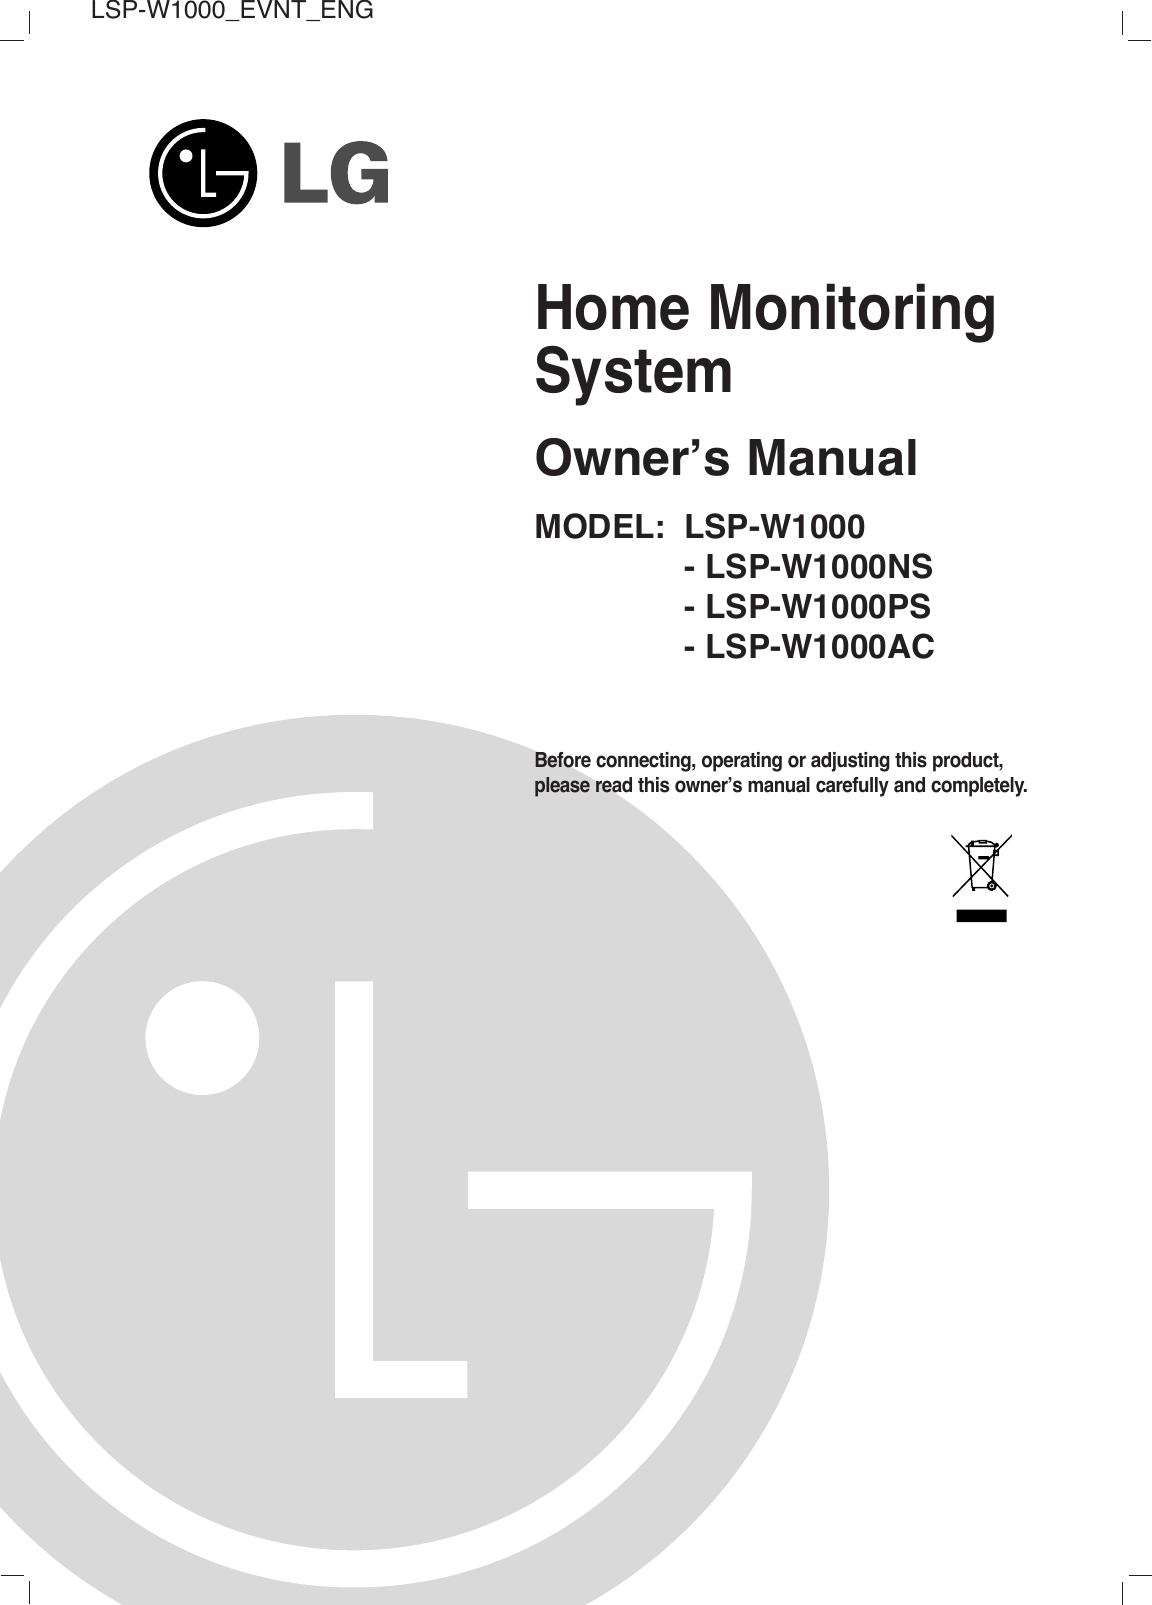 LSP-W1000_EVNT_ENGBefore connecting, operating or adjusting this product, please read this owner’s manual carefully and completely.Home Monitoring SystemOwner’s ManualMODEL: LSP-W1000  - LSP-W1000NS - LSP-W1000PS - LSP-W1000AC